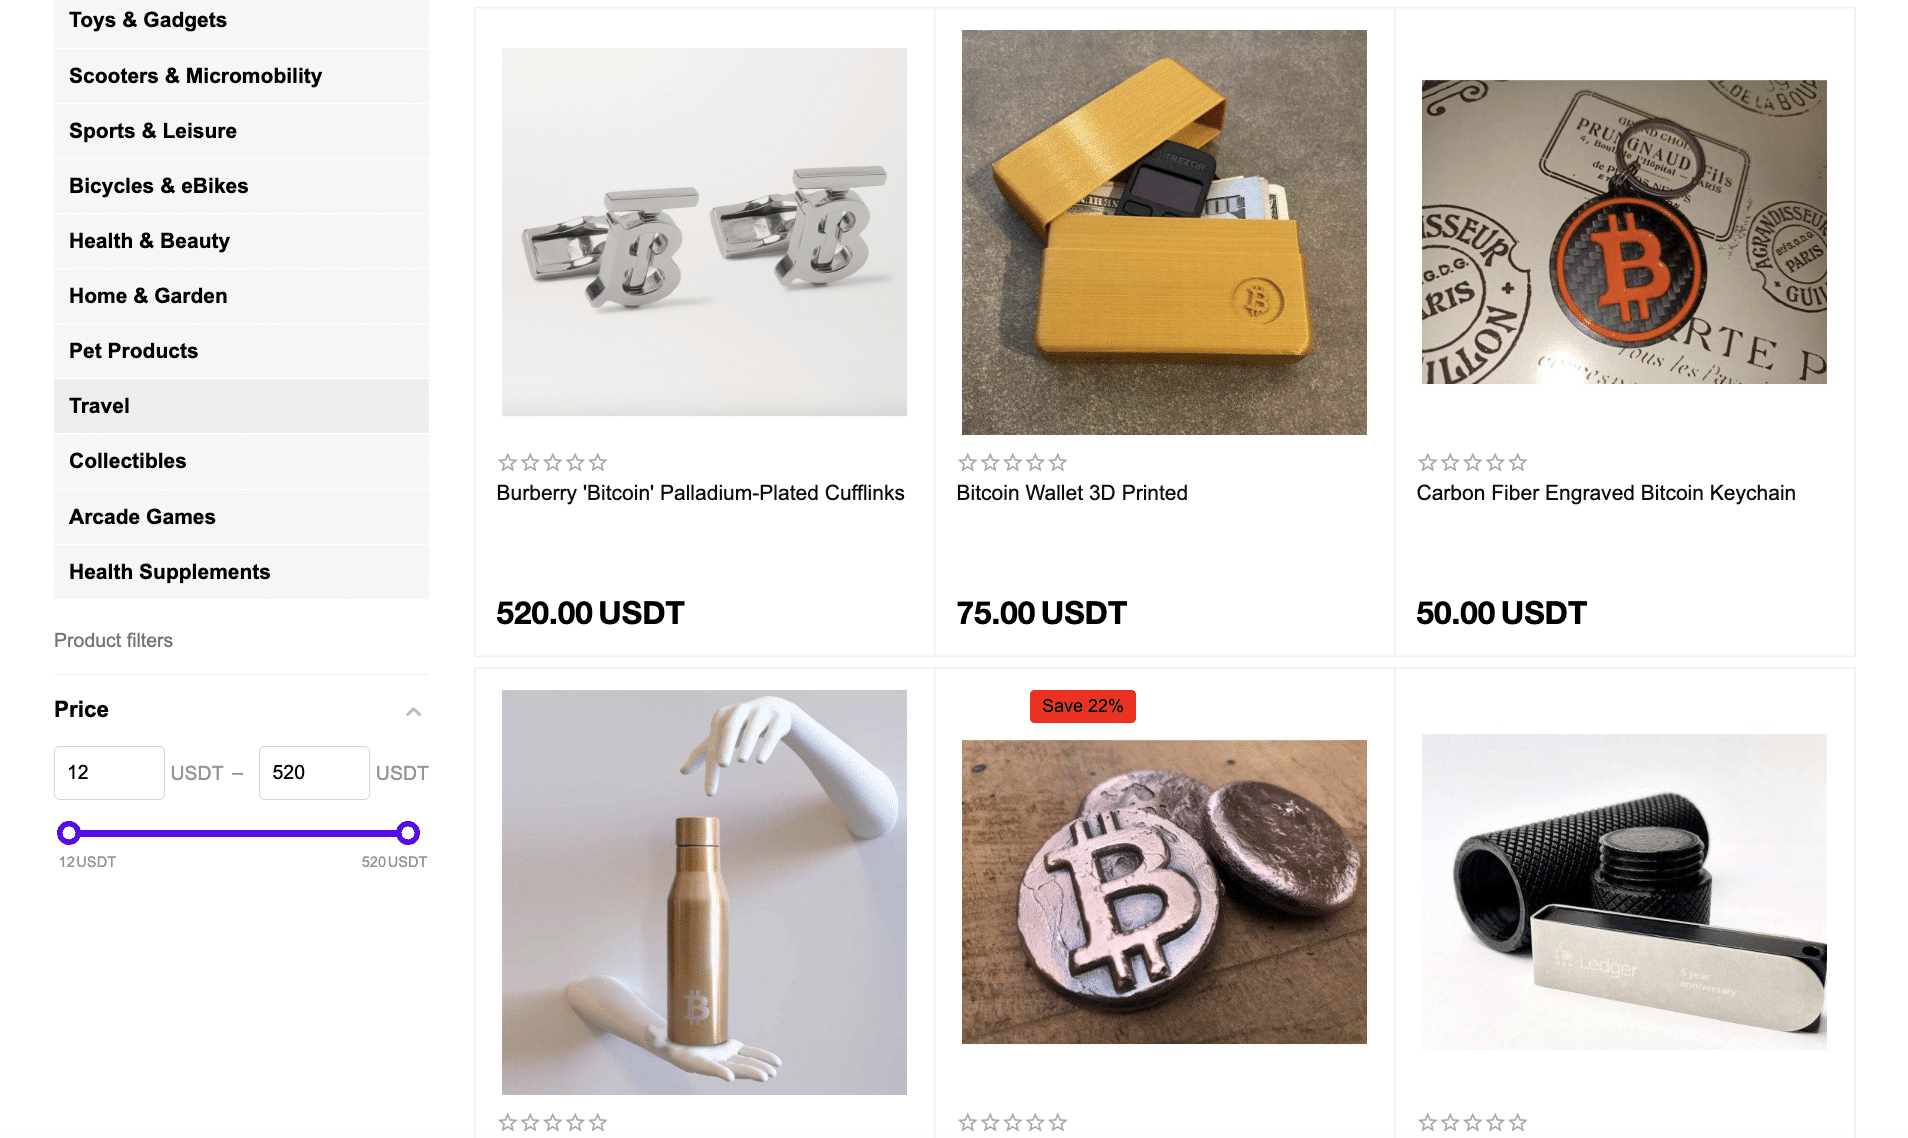 What Can You Buy with Bitcoin? - How and Where You Can Buy Things With Bitcoin